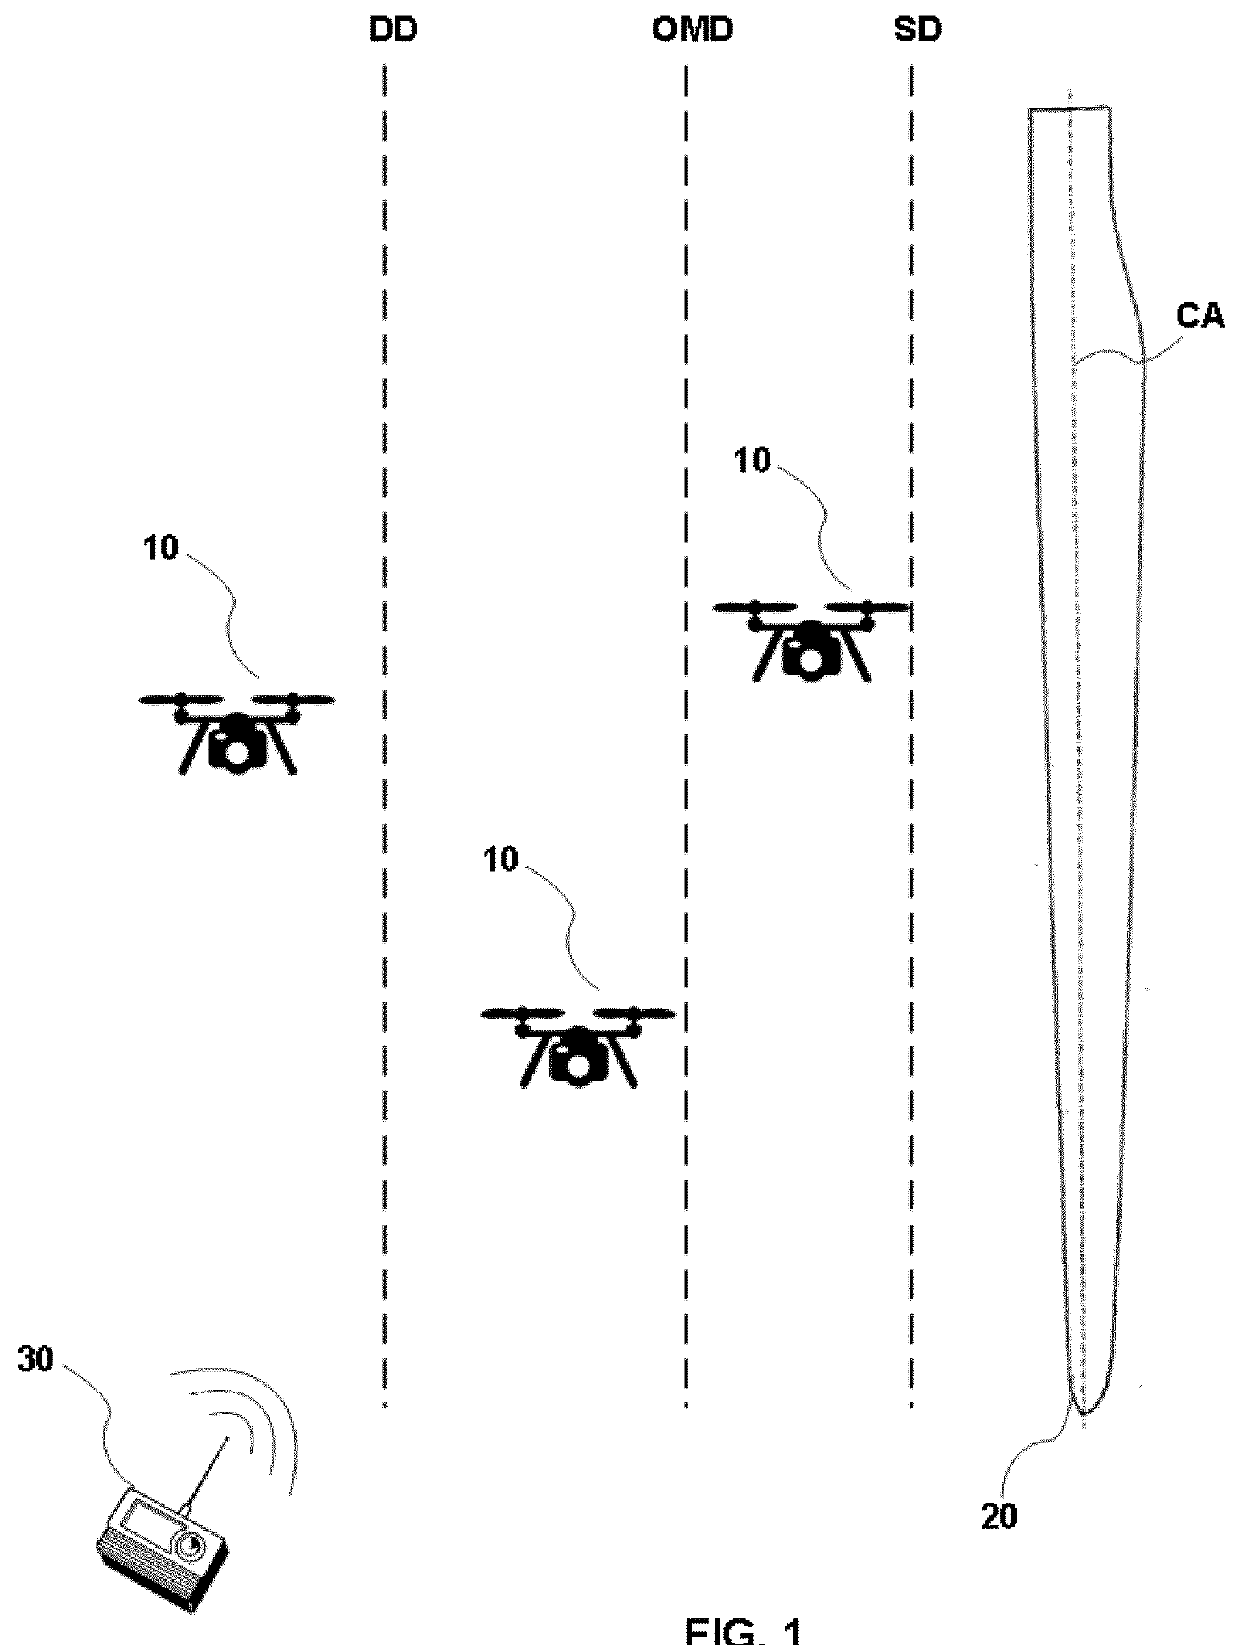 Autonomous inspection of elongated structures using unmanned aerial vehicles